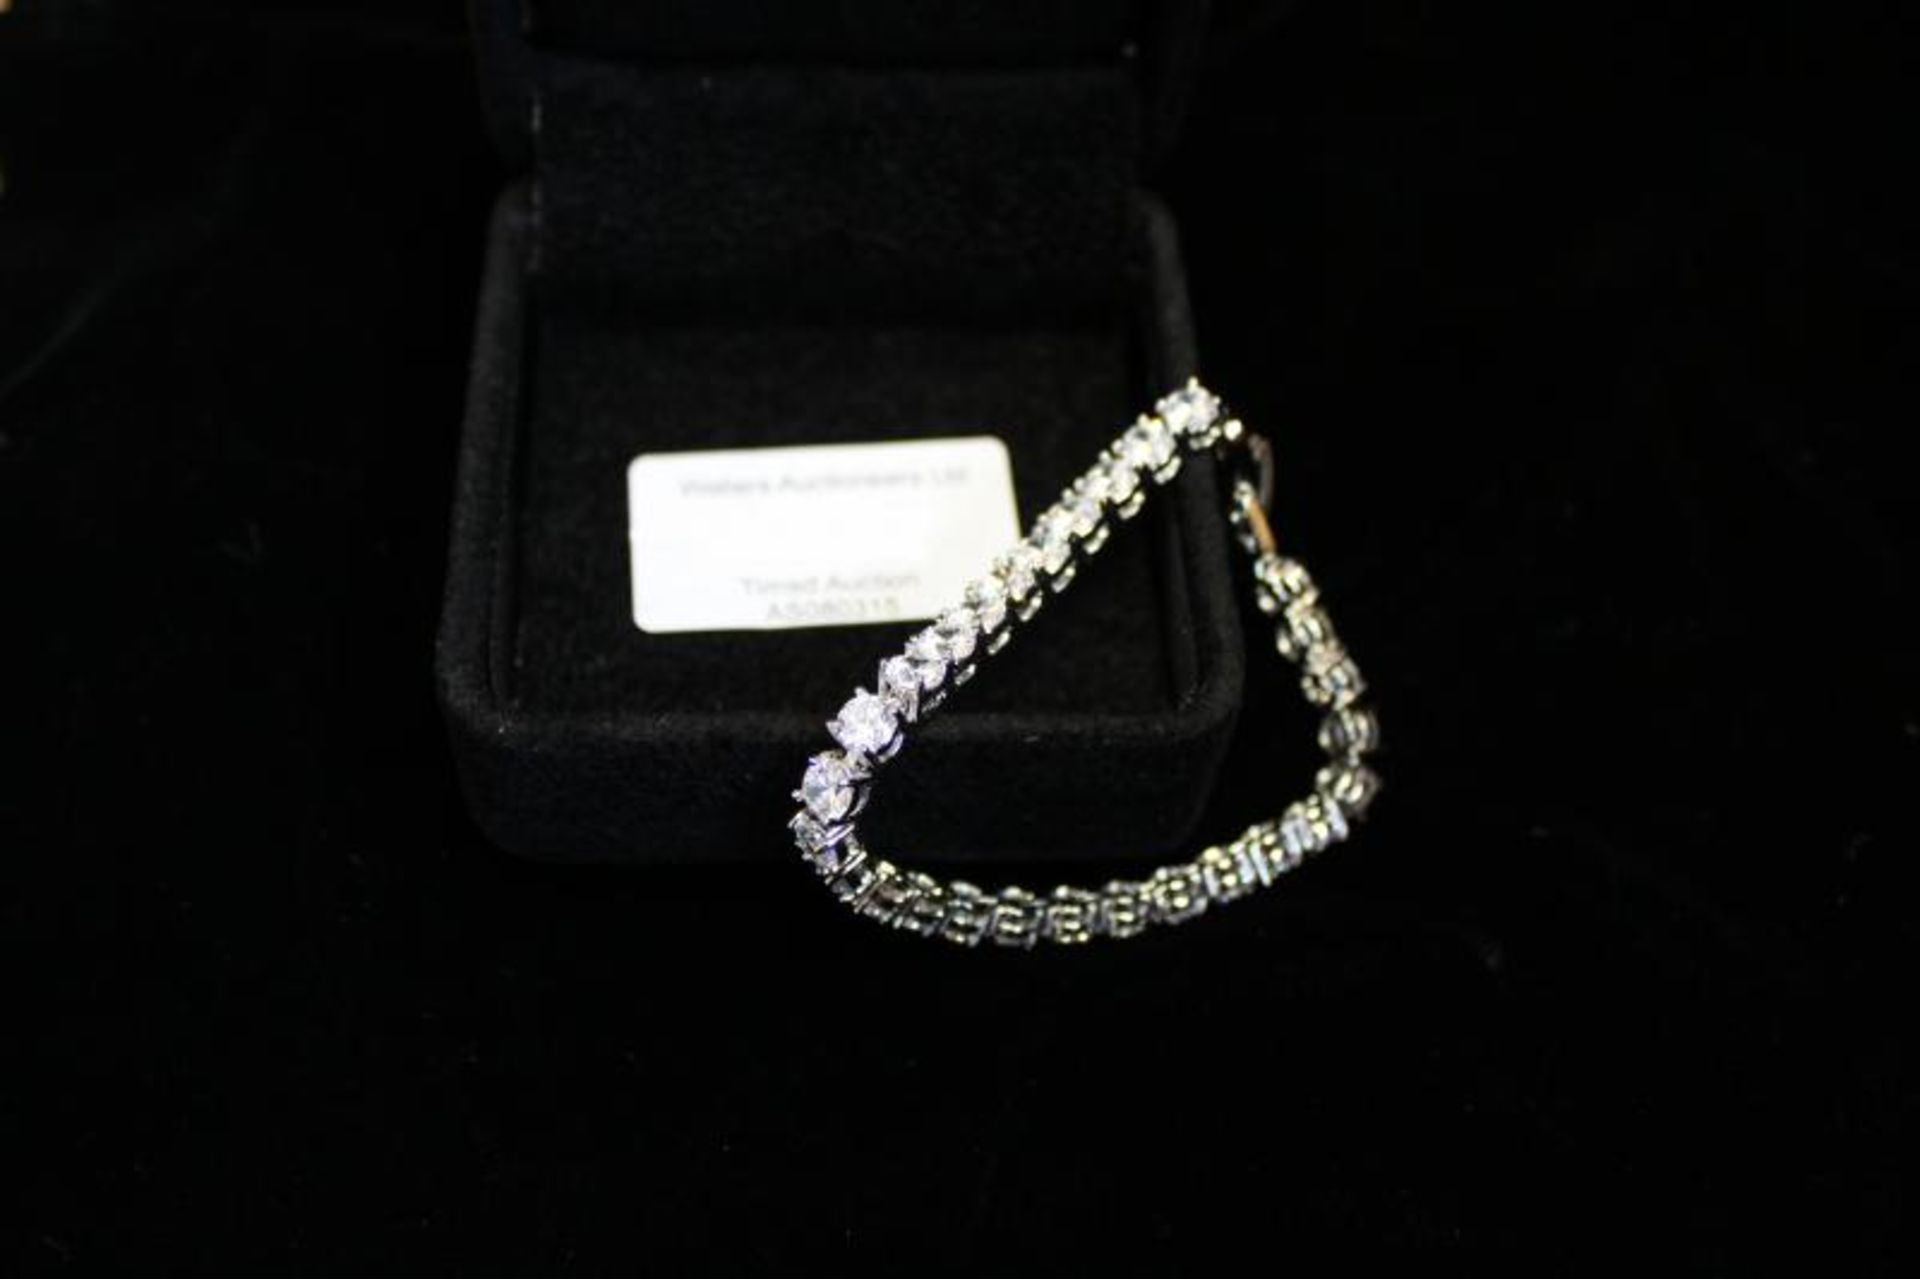 *Tennis bracelet, 18ct white gold plated set with cubic zirconia stones (Lot subject to VAT)